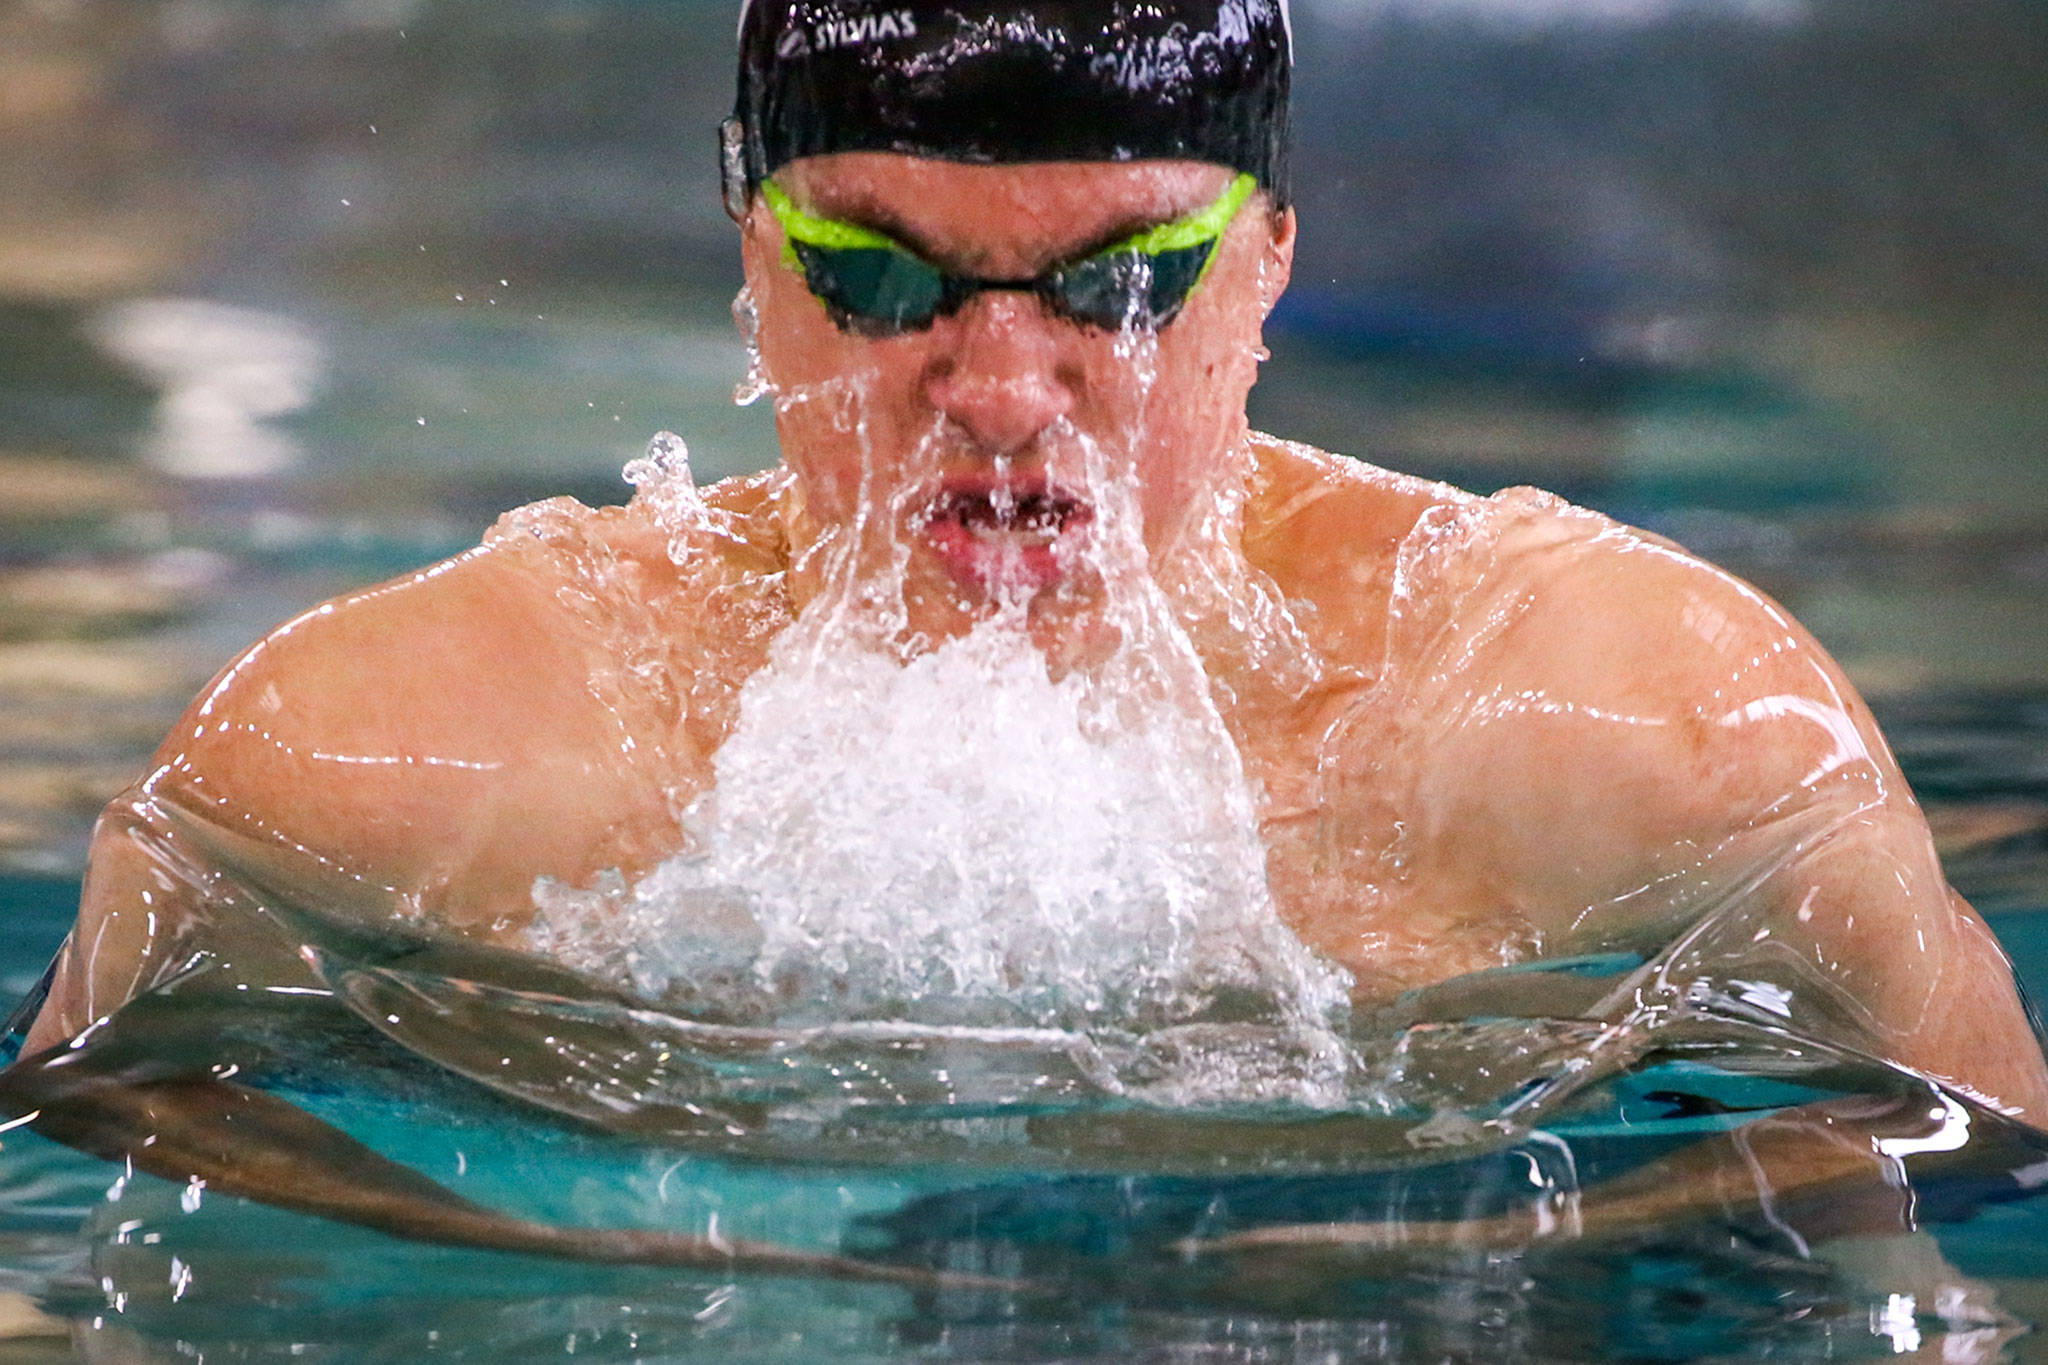 Lake Stevens’ Alejandro Flores competes in the 100-yard breaststroke during the Class 4A Northwest District Swim & Dive Championships on Feb. 15, 2020, at Snohomish Aquatic Center. (Kevin Clark / The Herald)